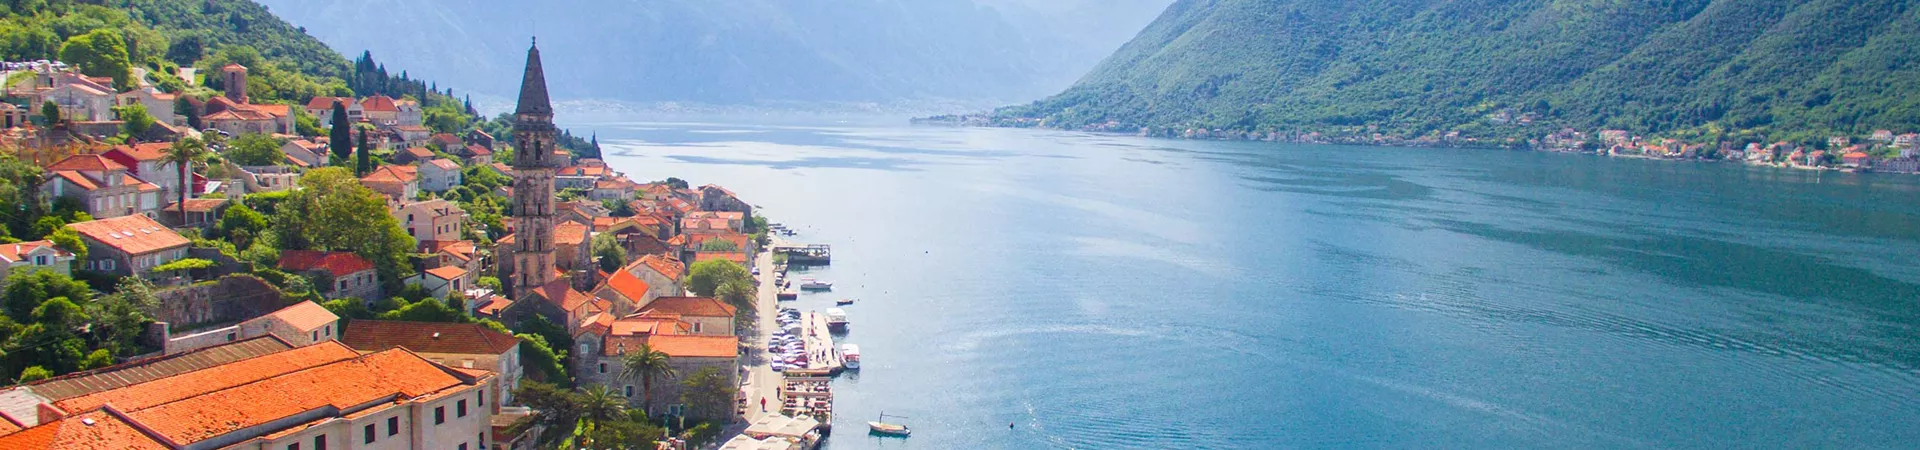 Scenic view of Perast and Kotor Bay in Montenegro